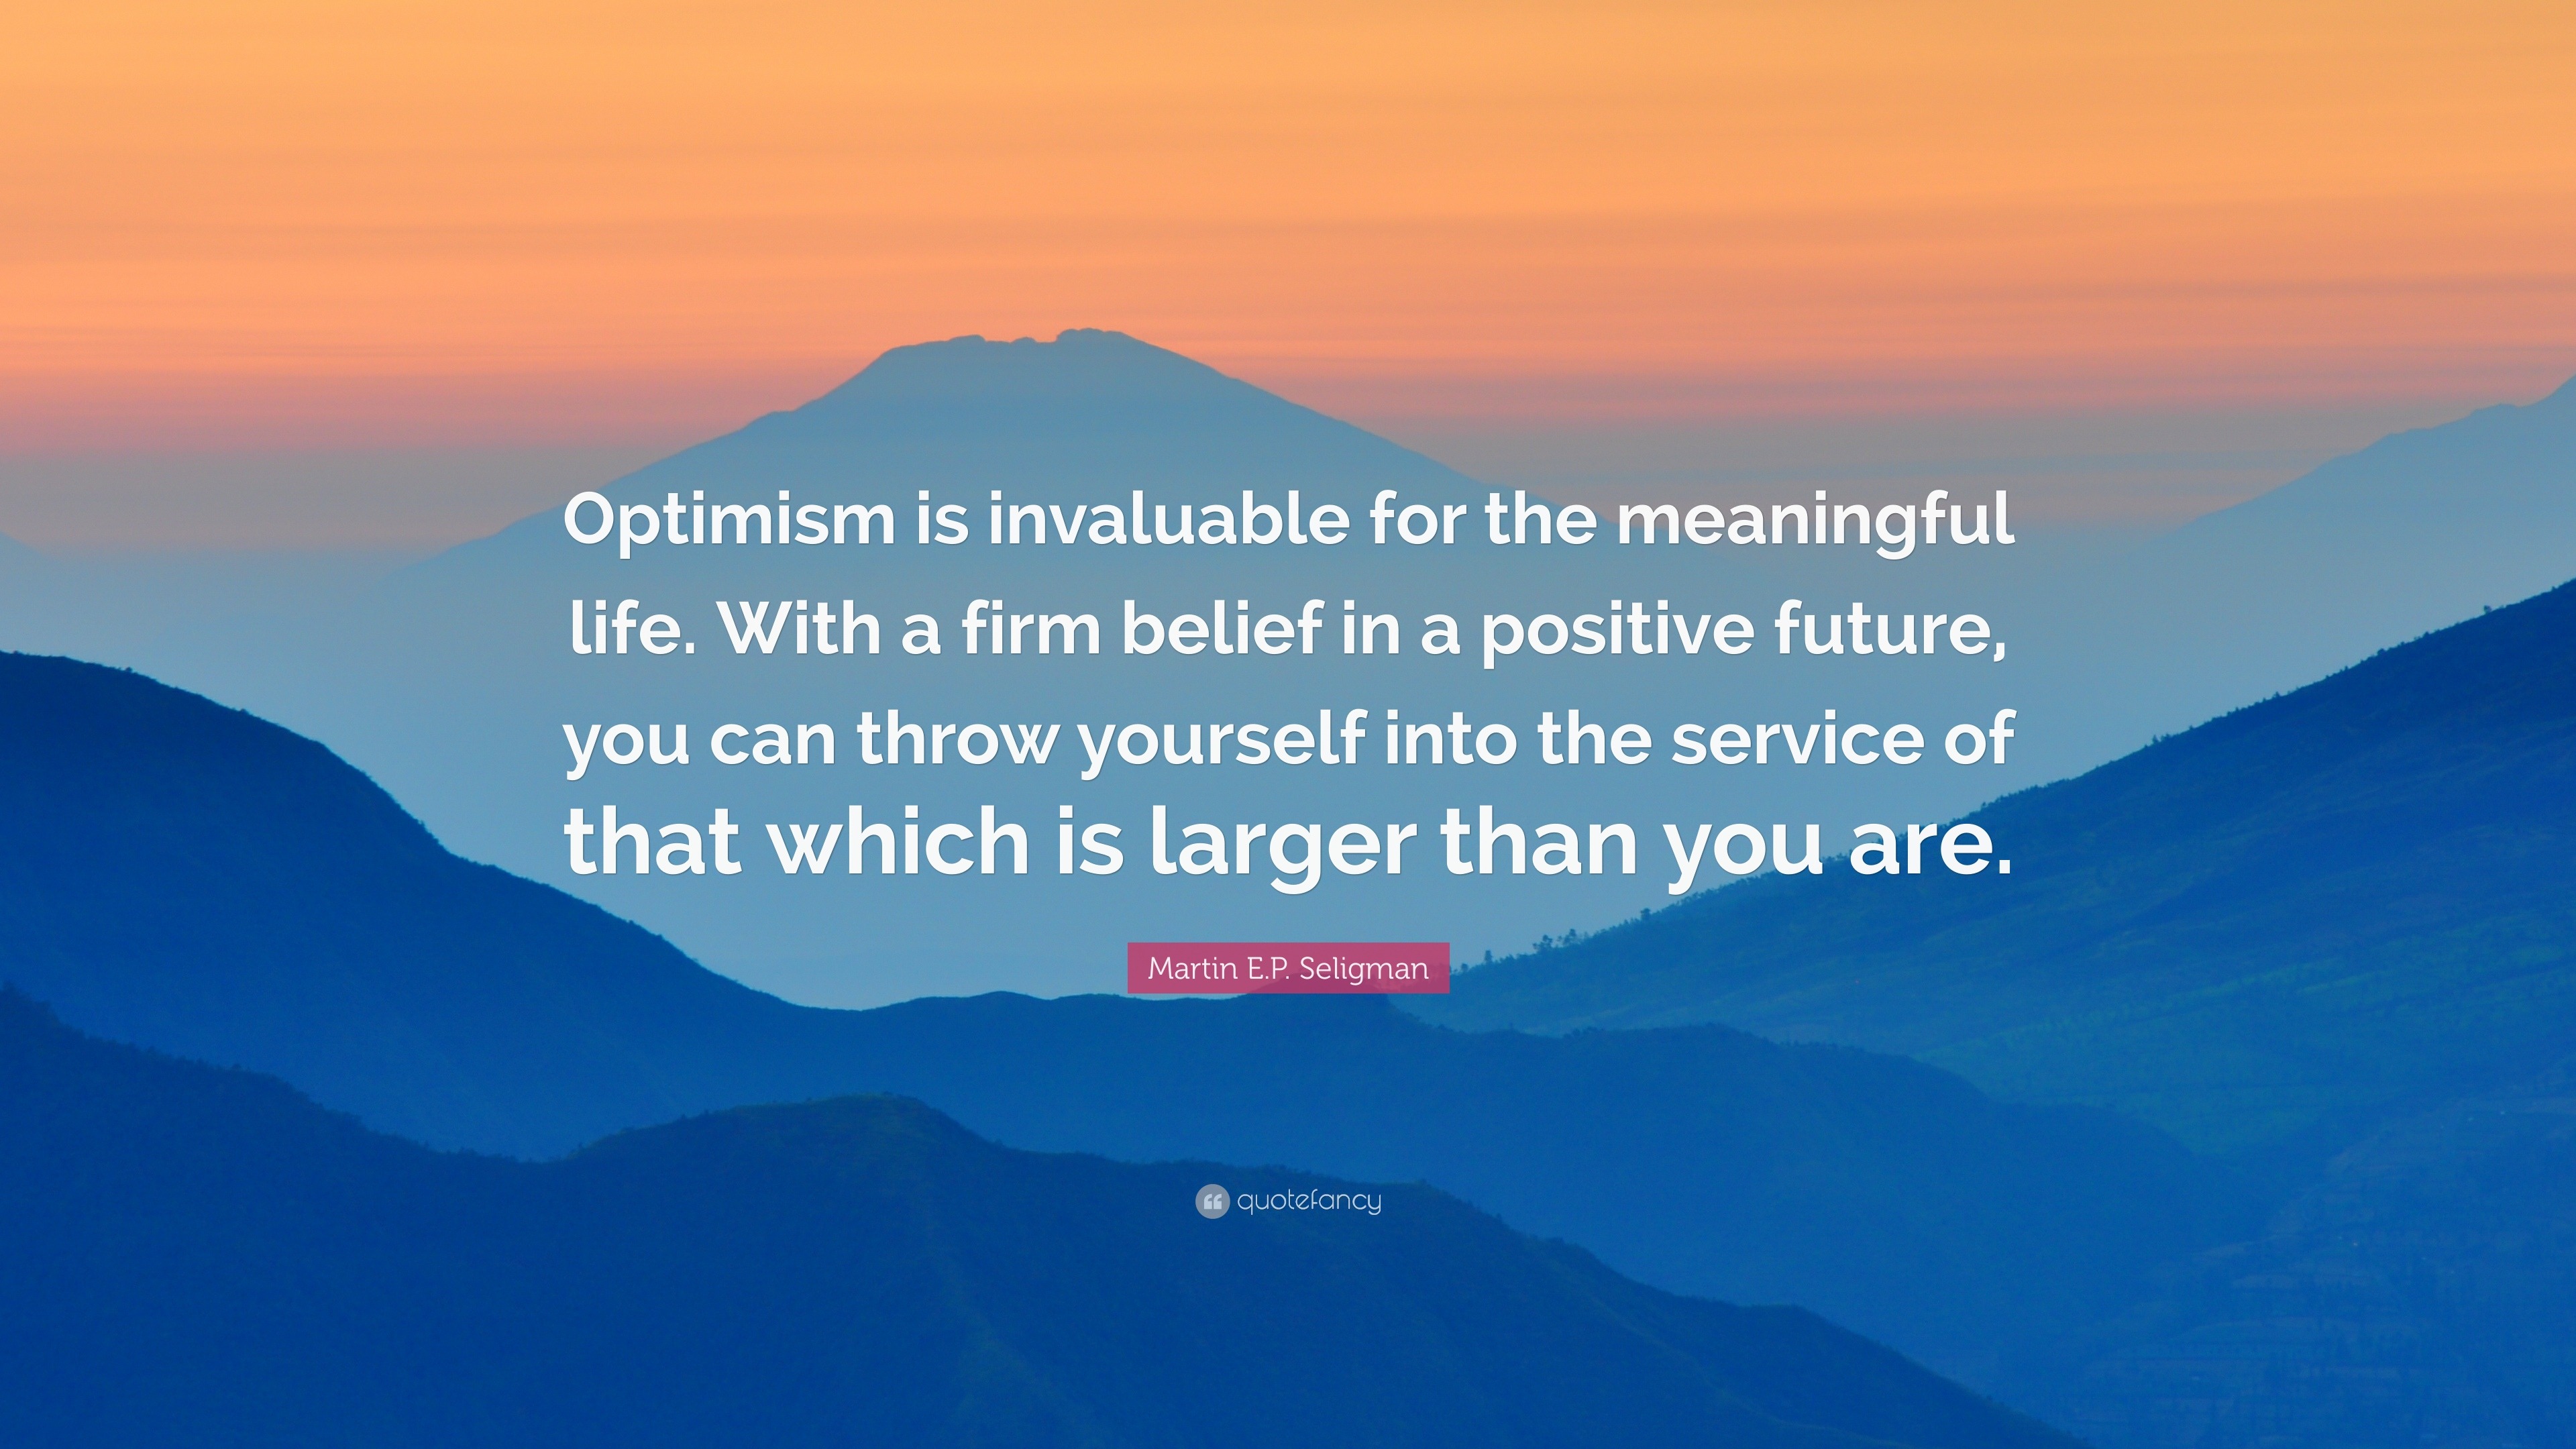 lds picture quotes on optimism